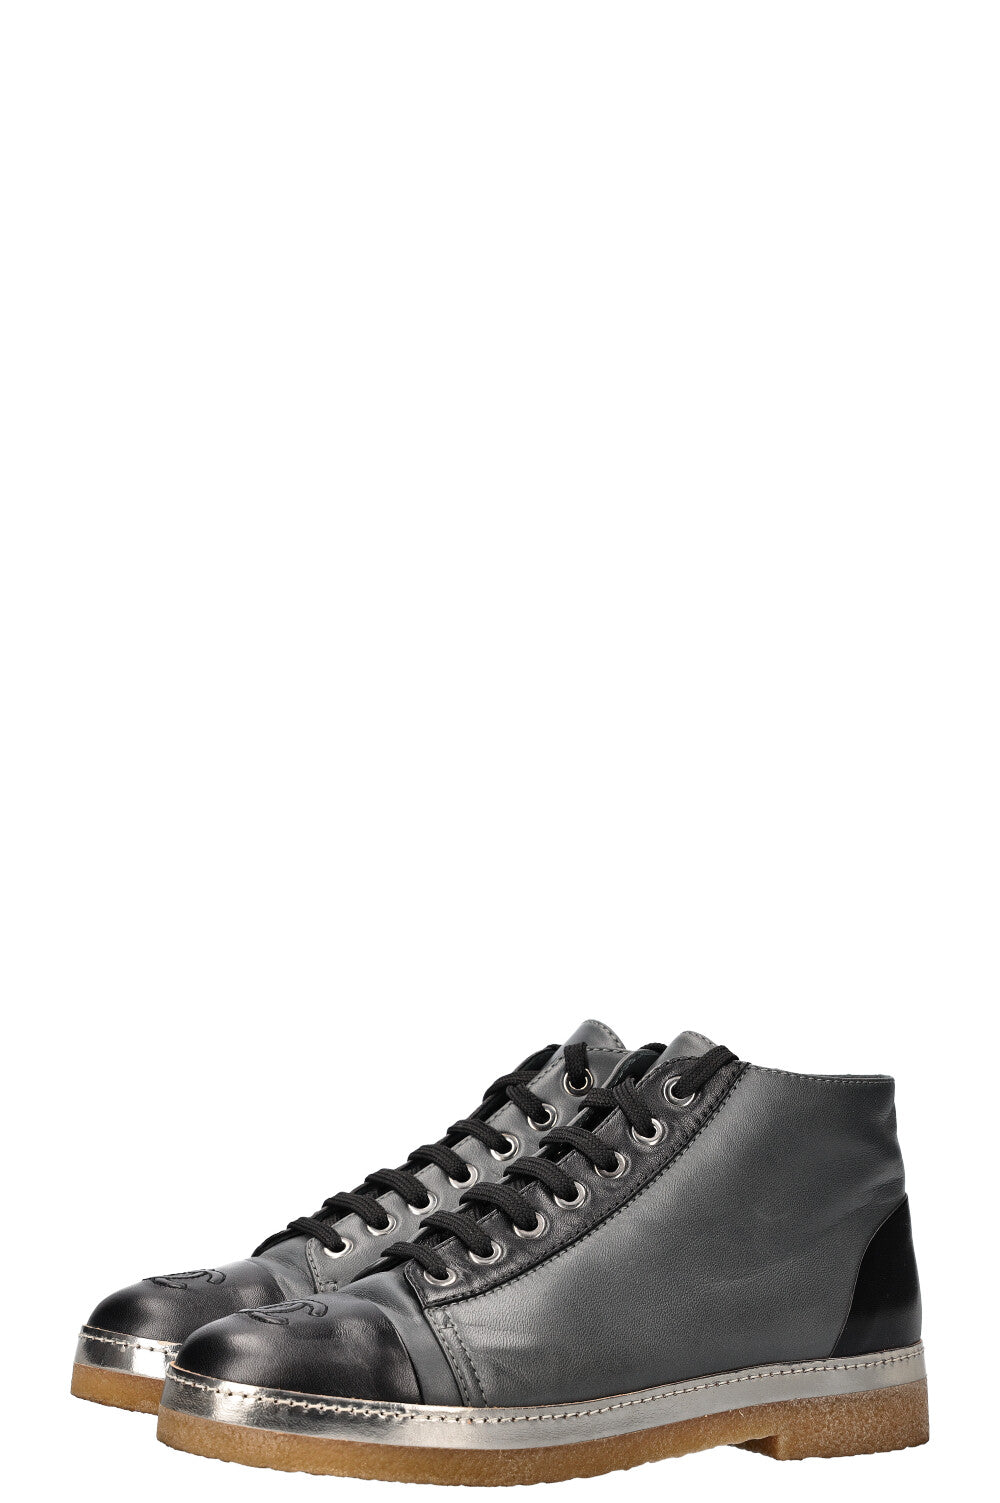 CHANEL High Top Sneakers Grey and Black